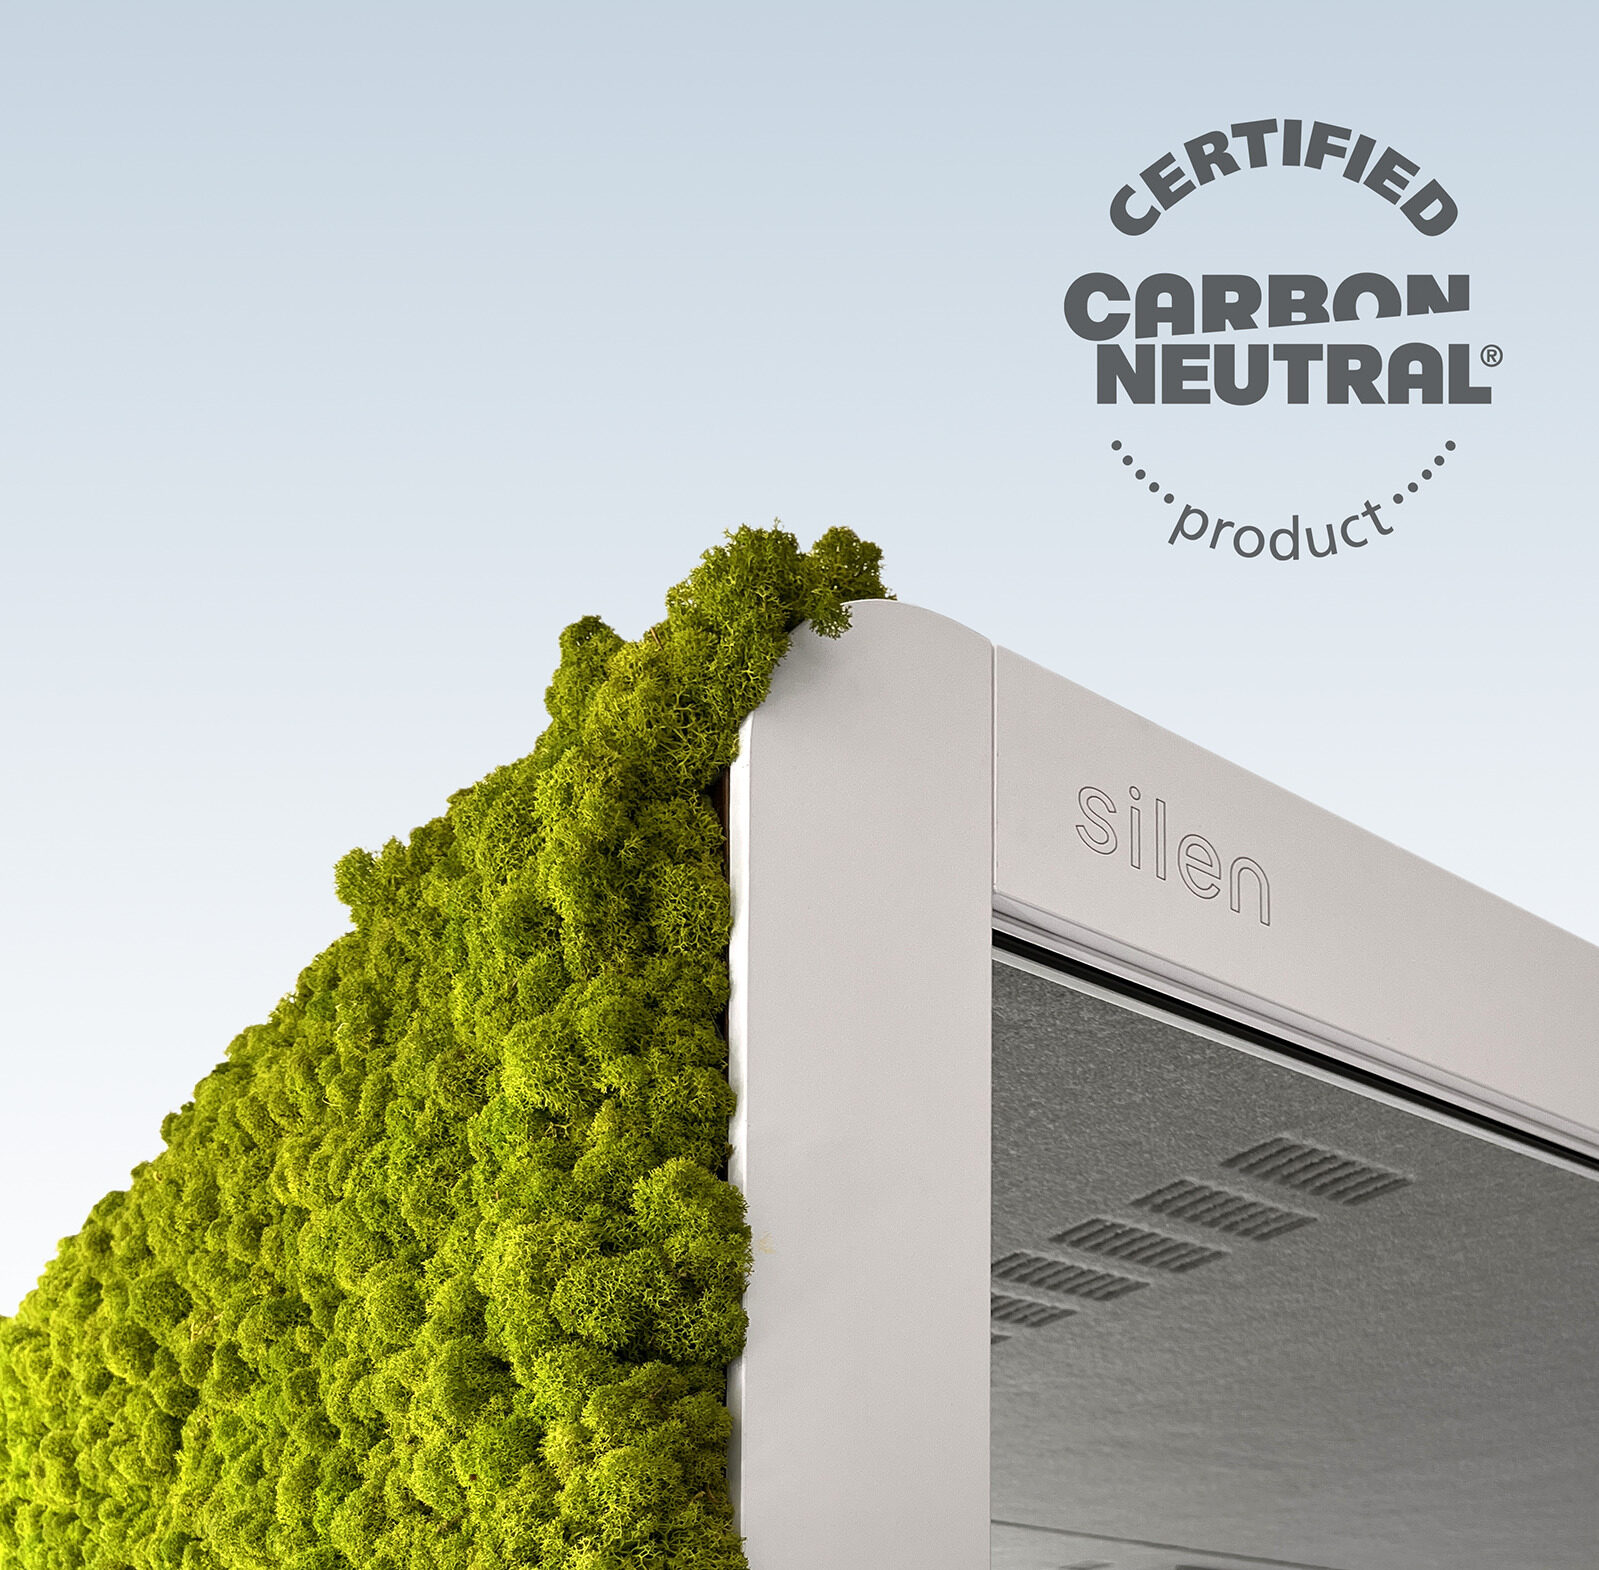 All Silen's pods are certified CarbonNeutral®